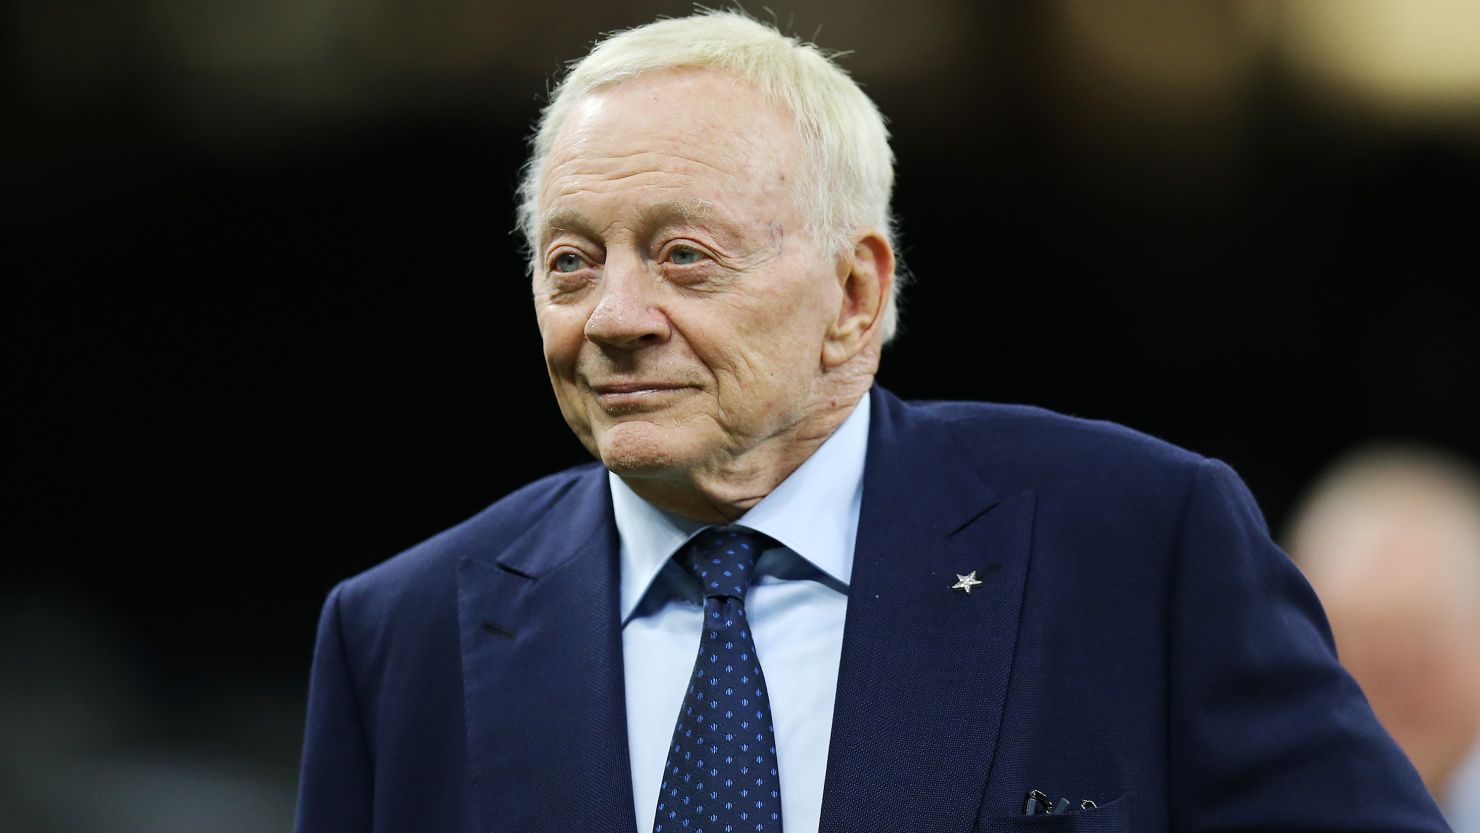 Dallas Cowboys owner Jerry Jones has not commented on the paternity claim, but argued in court that the woman did not have standing to sue.